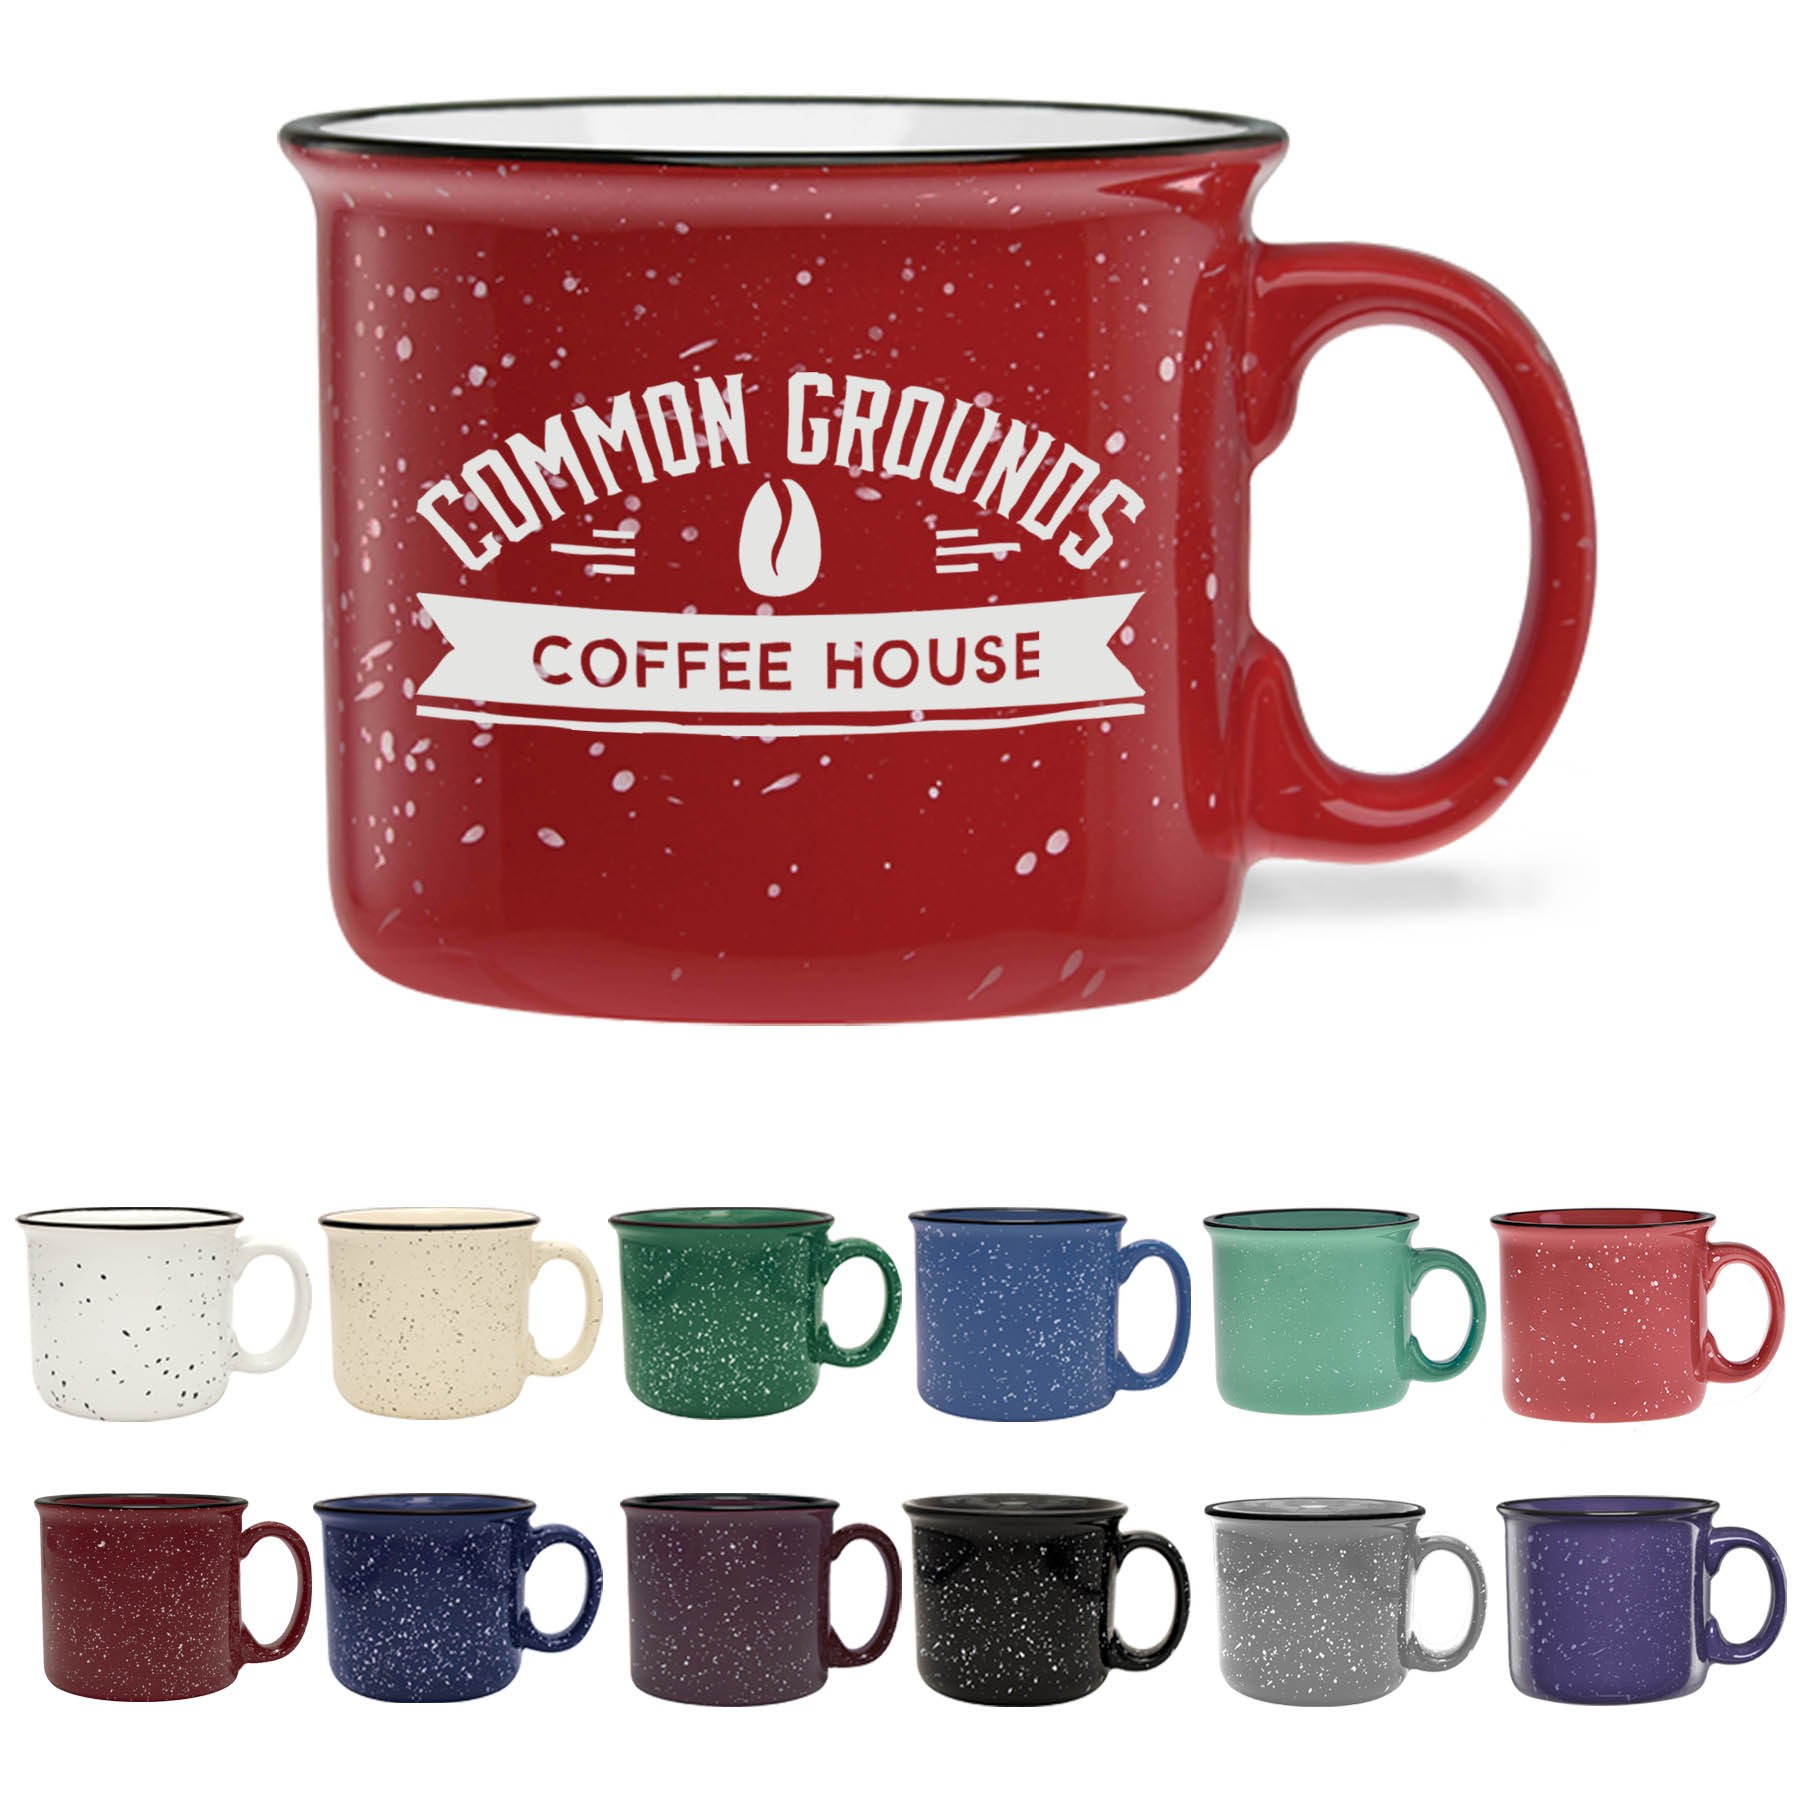 customizable mugs designed and made by garuda promotions